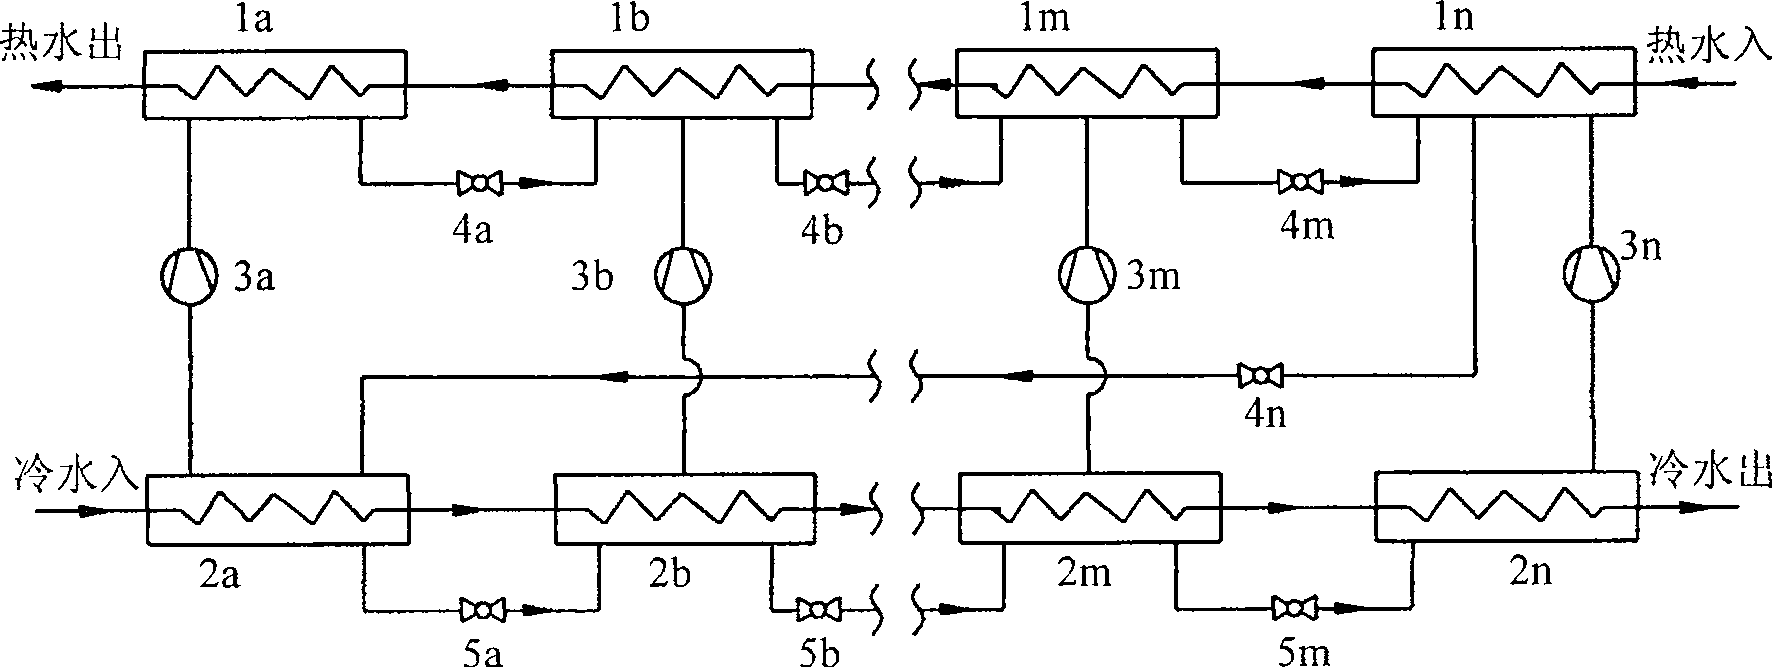 Multistage-cascaded compression type heat pump set under large temperature difference